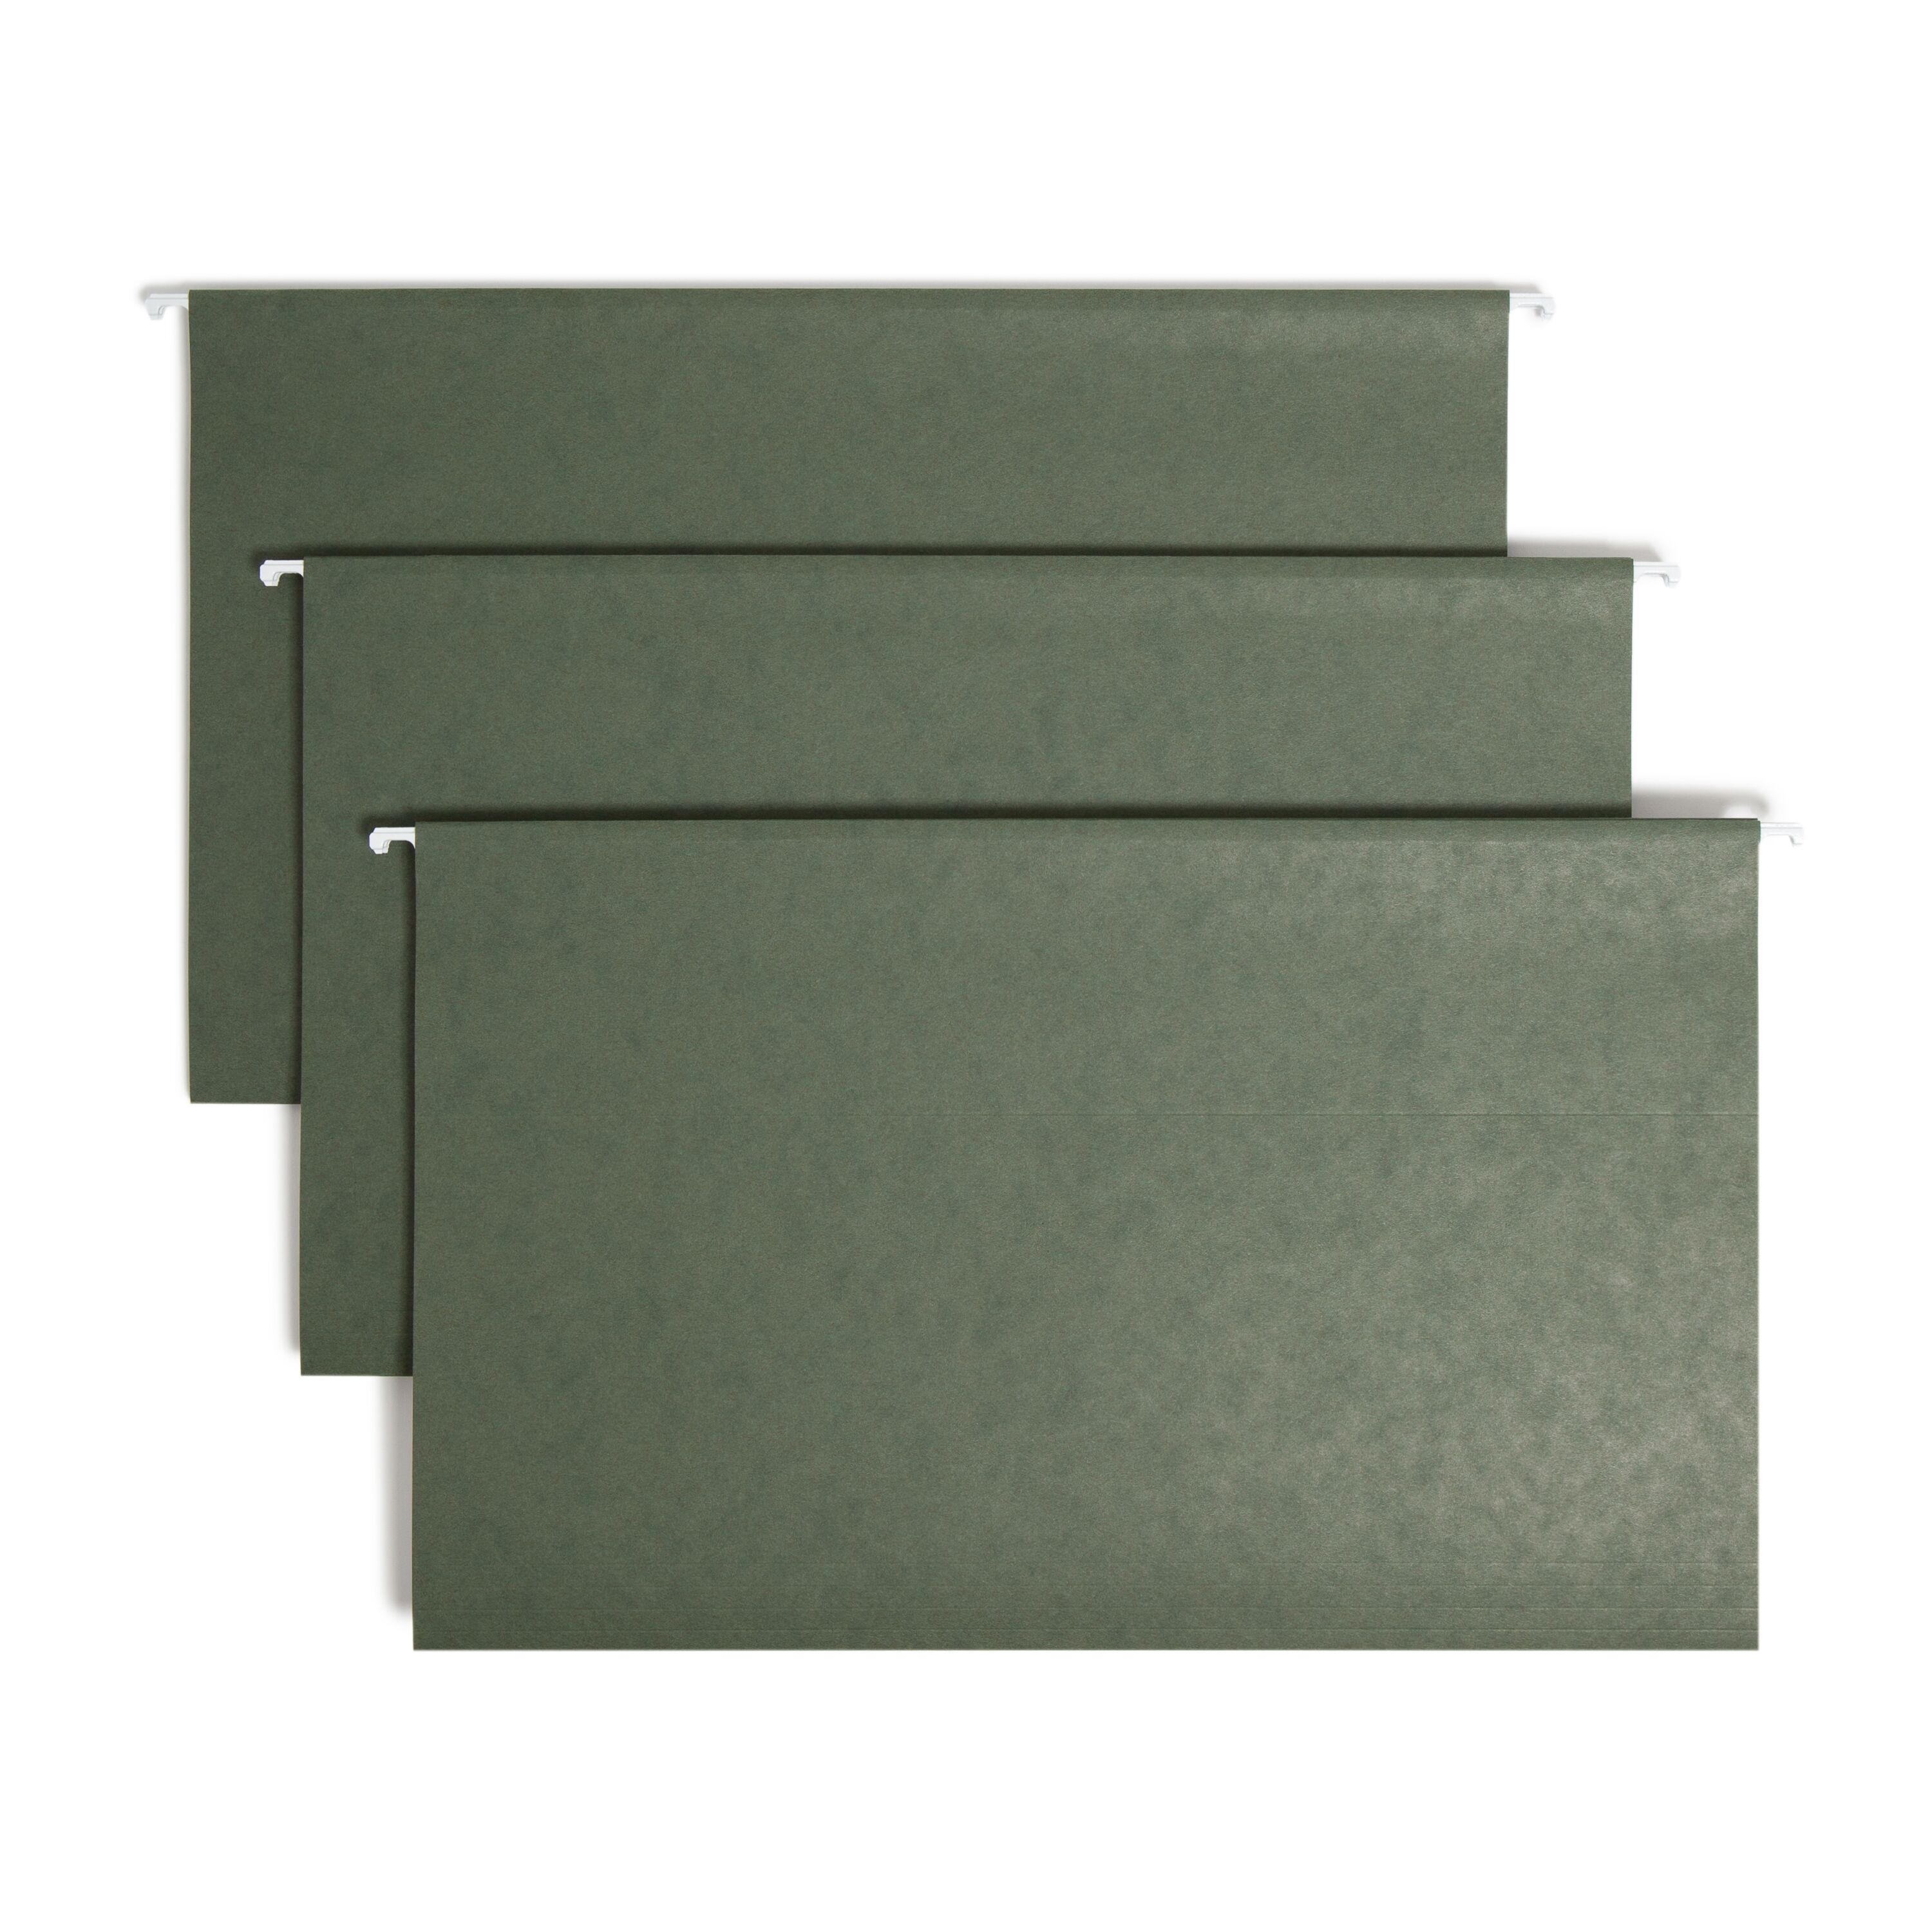 Smead Hanging File Folder with Tab, 1/3- Cut Adjustable Tab, Legal Size, Standard Green, 25 per Box (64135) - image 1 of 5